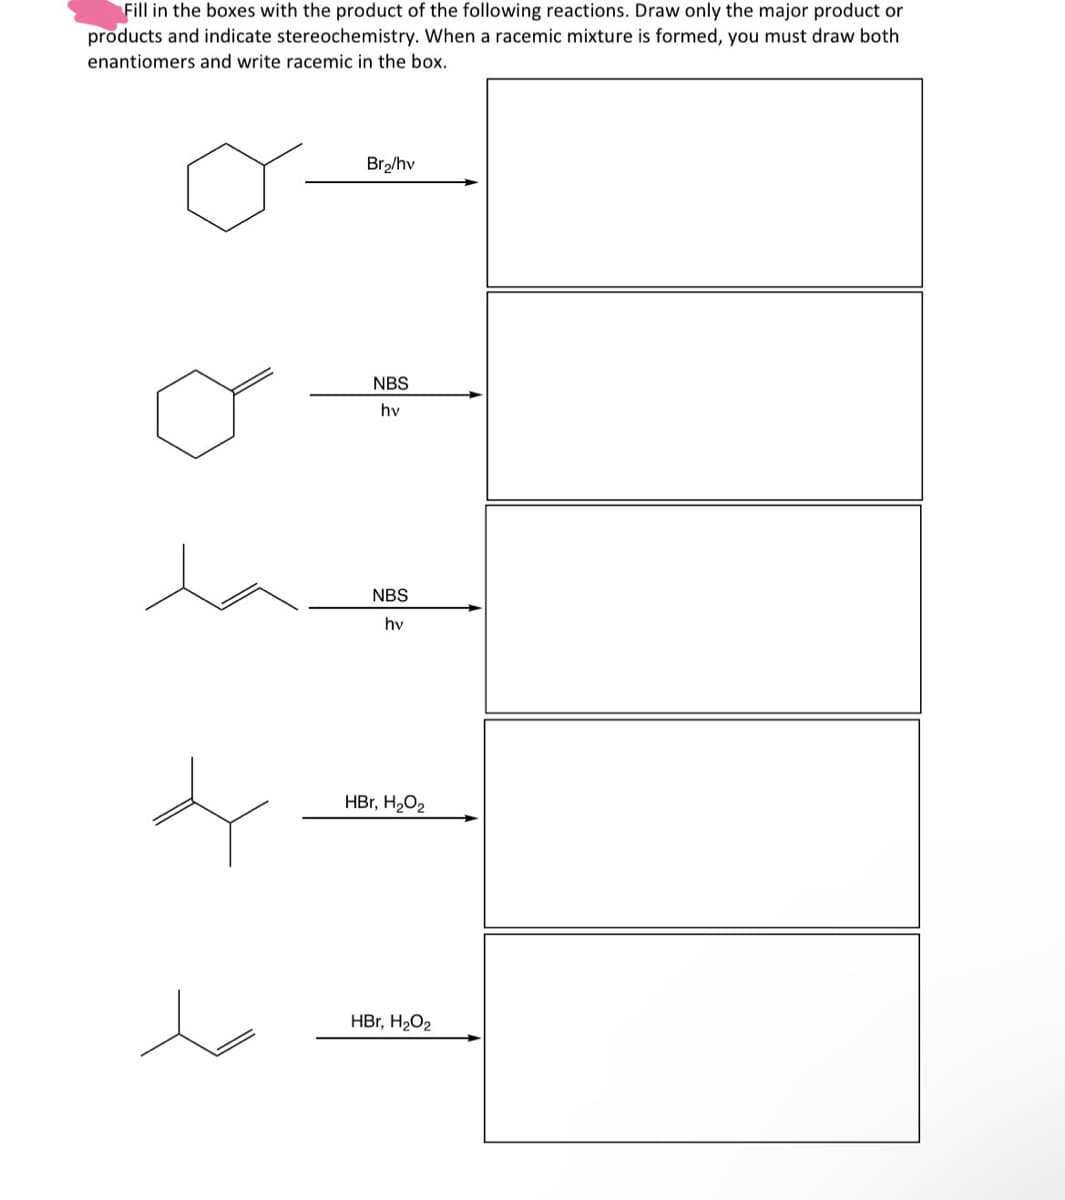 Fill in the boxes with the product of the following reactions. Draw only the major product or
products and indicate stereochemistry. When a racemic mixture is formed, you must draw both
enantiomers and write racemic in the box.
Bra/hv
NBS
hv
NBS
hv
HBr, H₂O₂
HBr, H₂O2